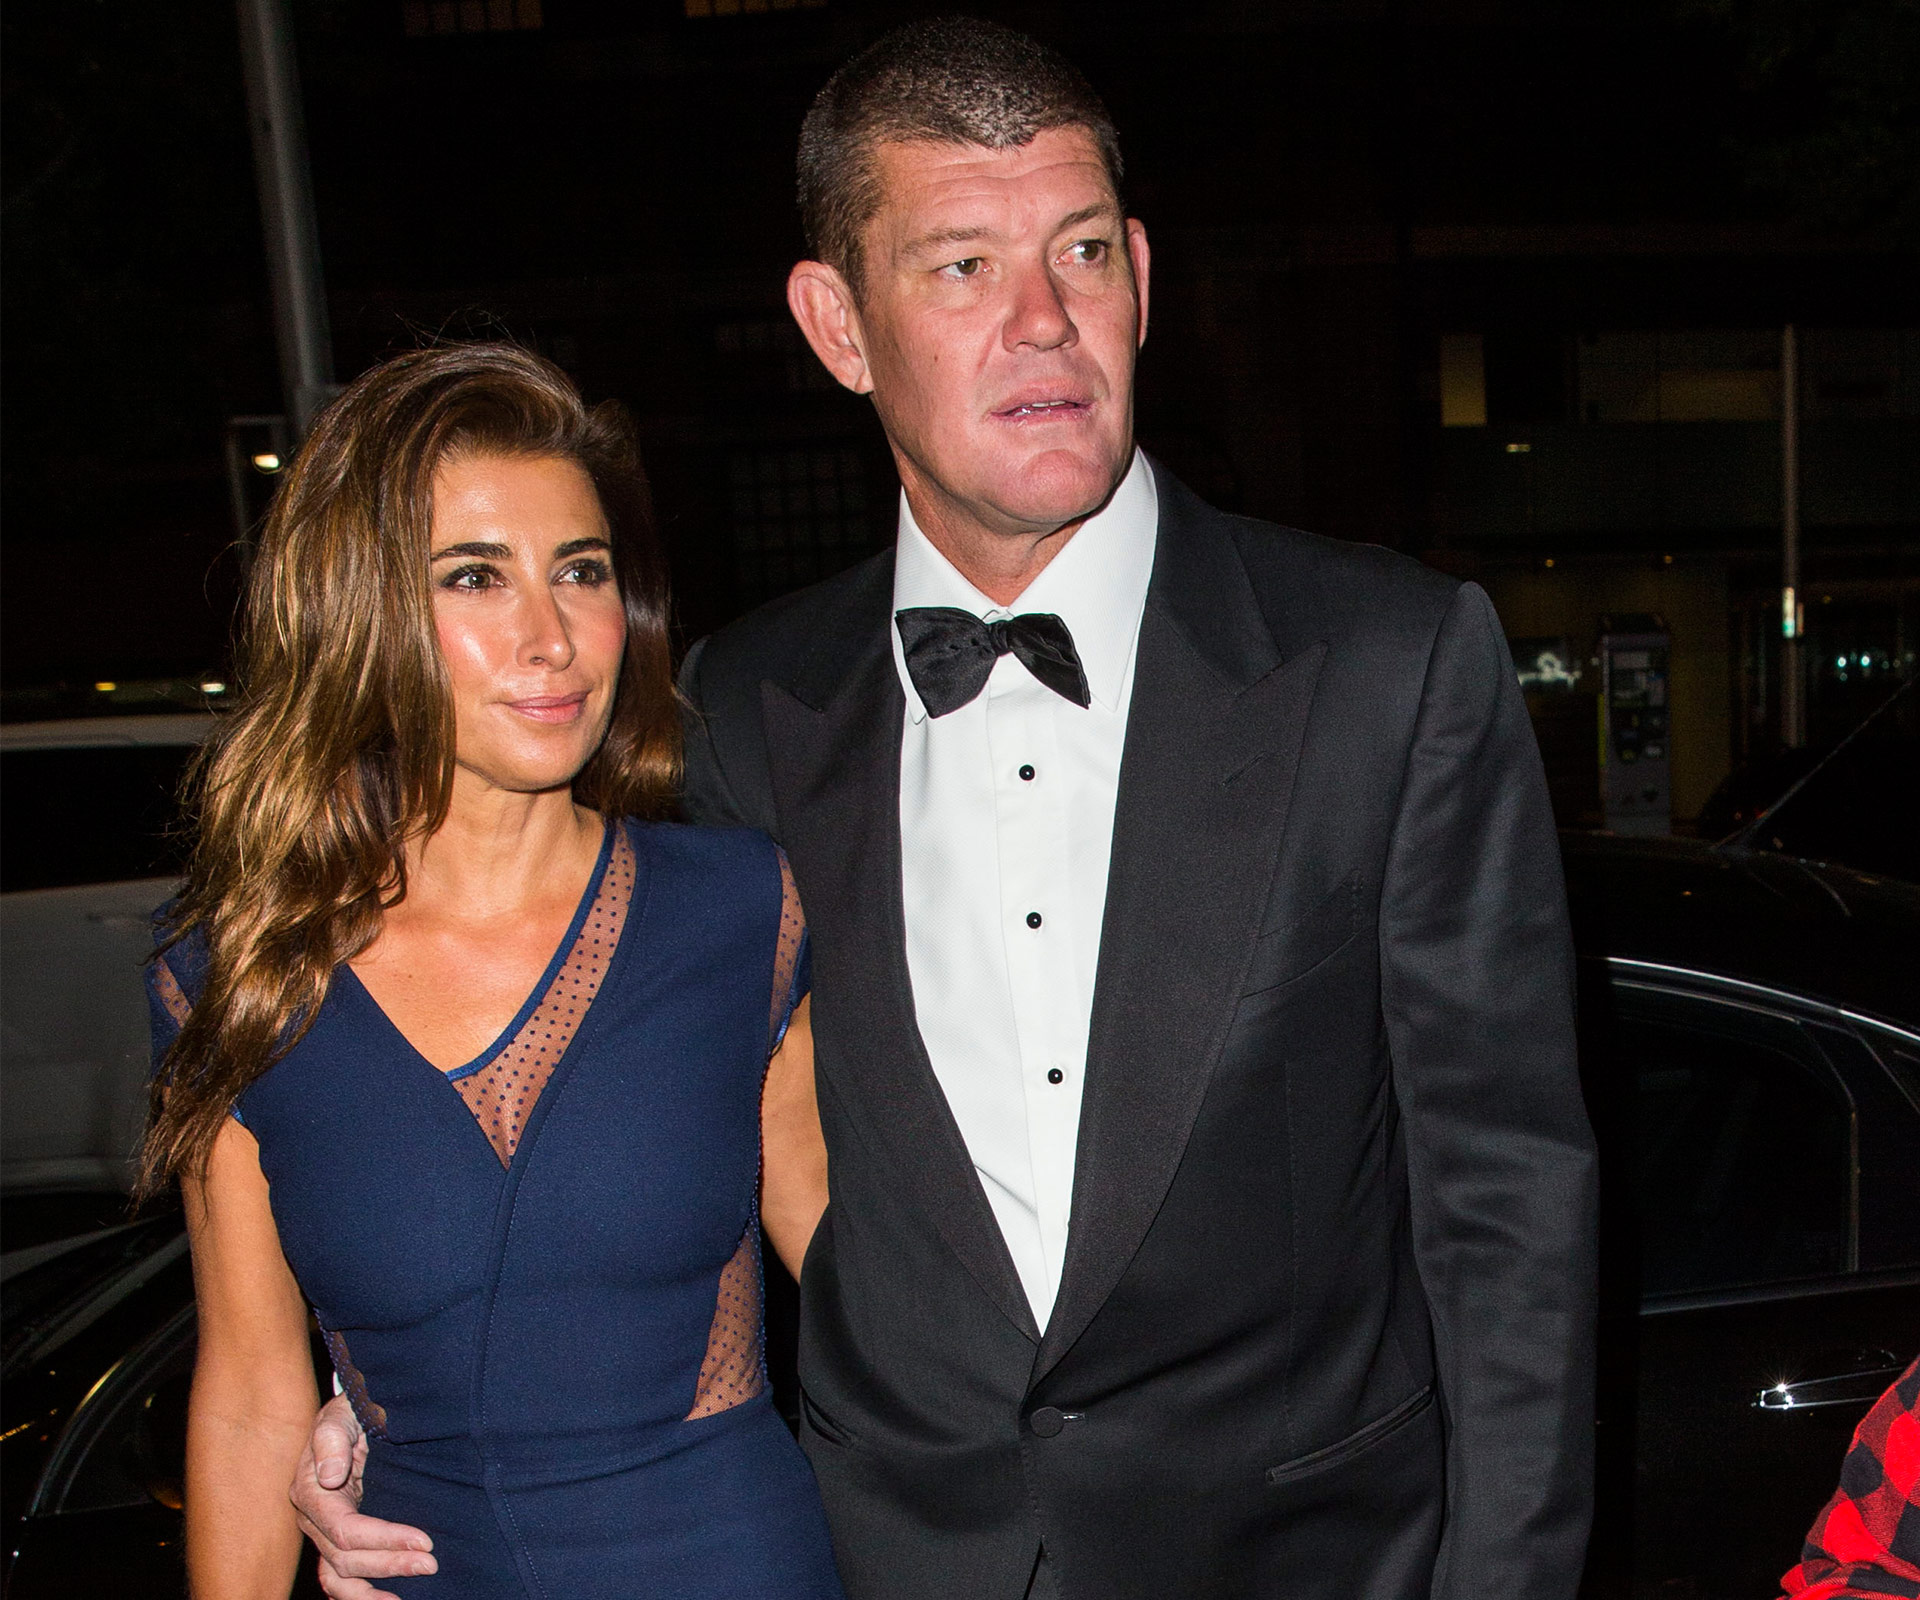 Jodhi Meares and James Packer